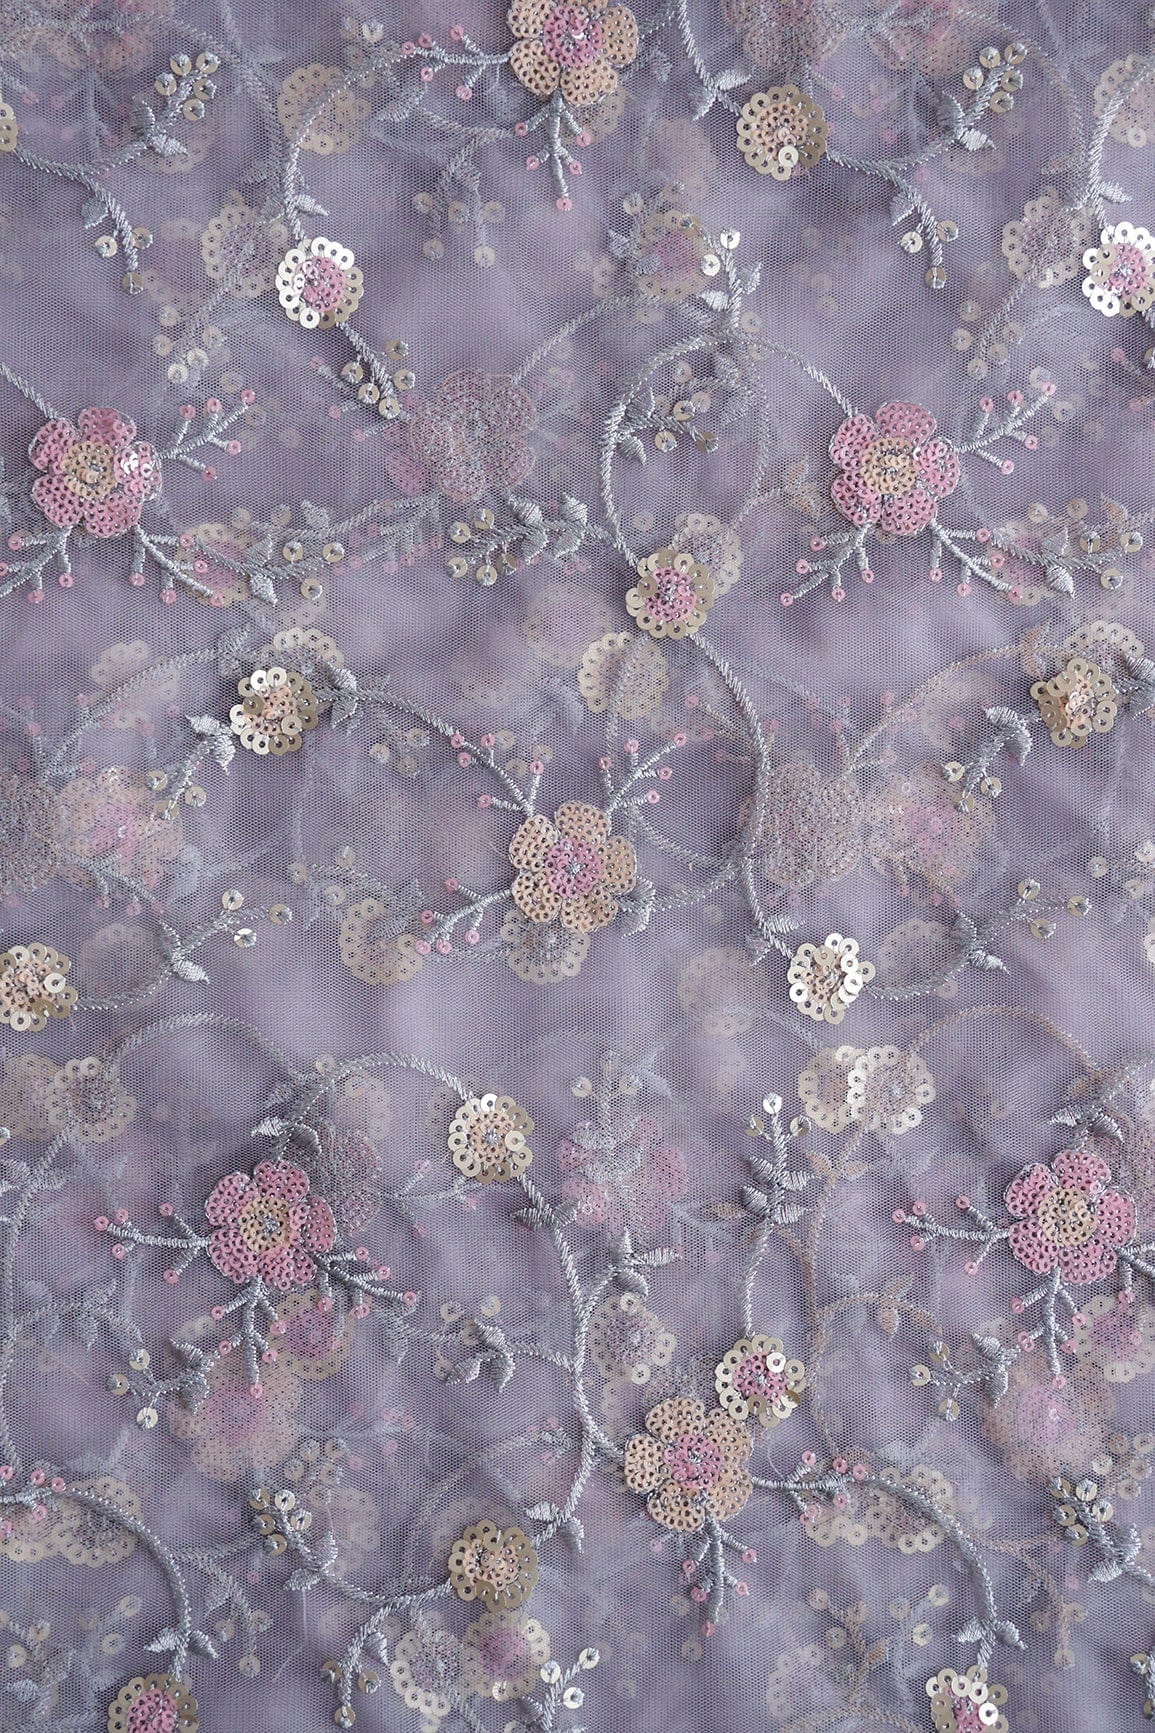 doeraa Embroidery Fabrics Beautiful Multi Color Sequins Floral Embroidery Work On Grey Soft Net Fabric